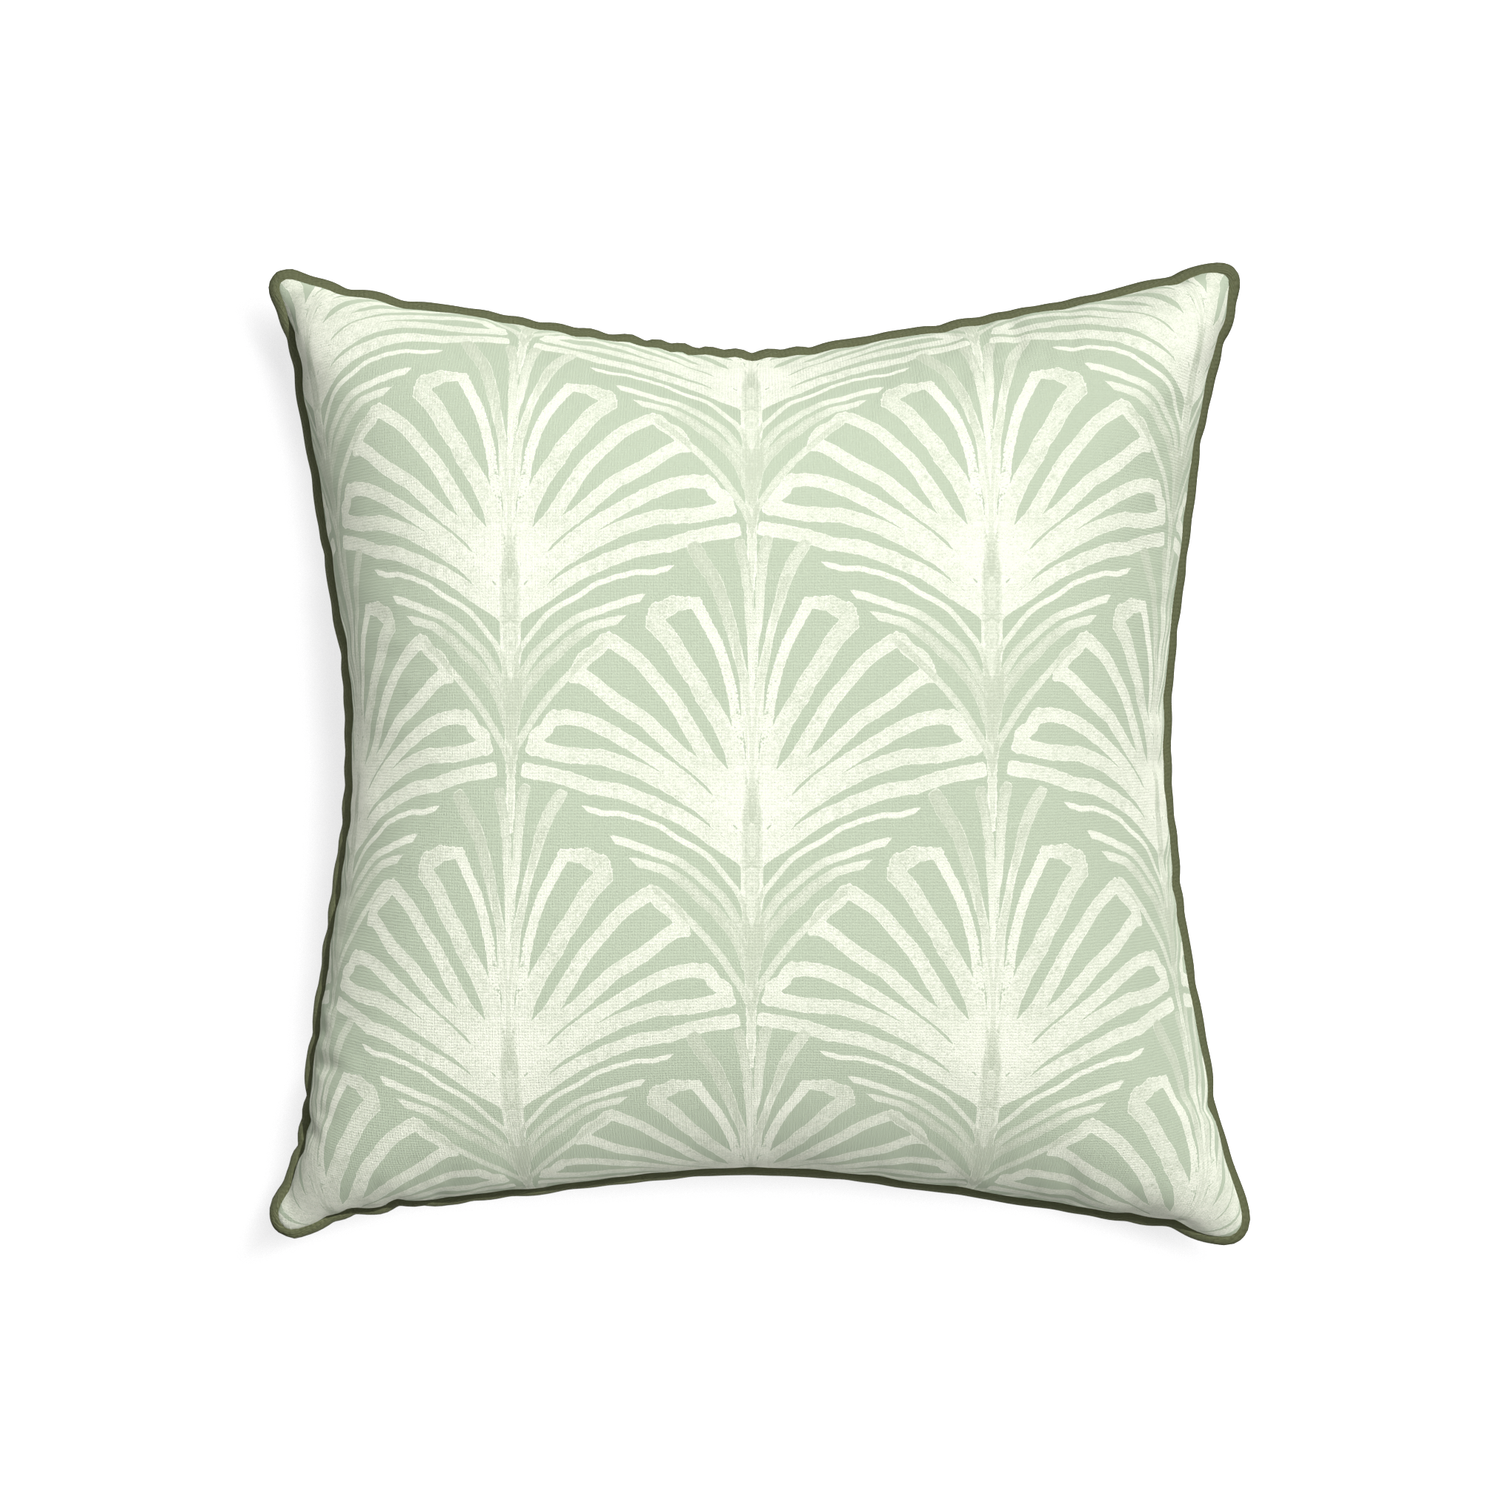 22-square suzy sage custom pillow with f piping on white background